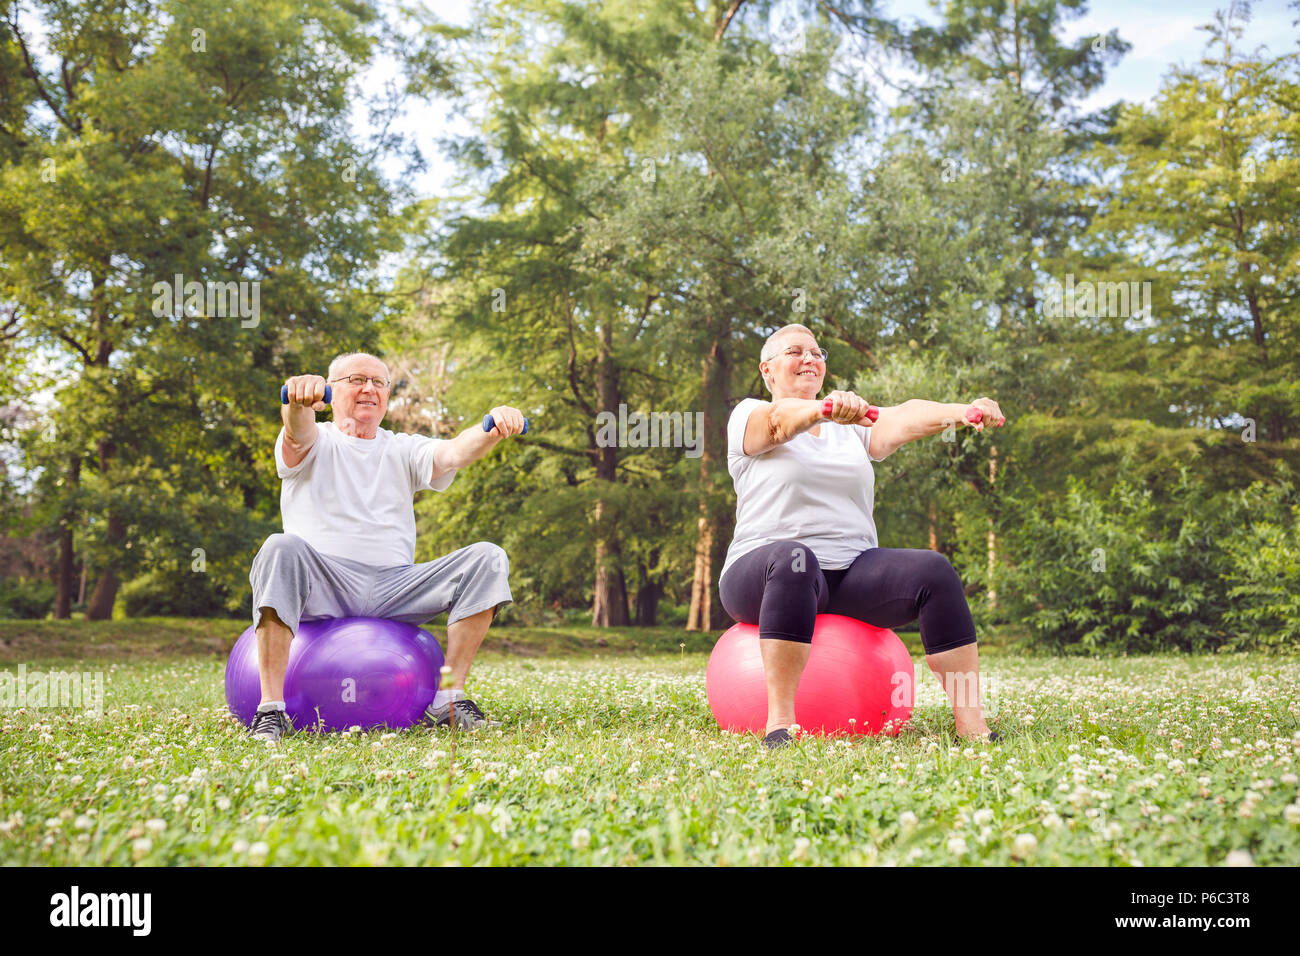 Smiling senior man and woman doing fitness exercises on fitness ball in park Stock Photo